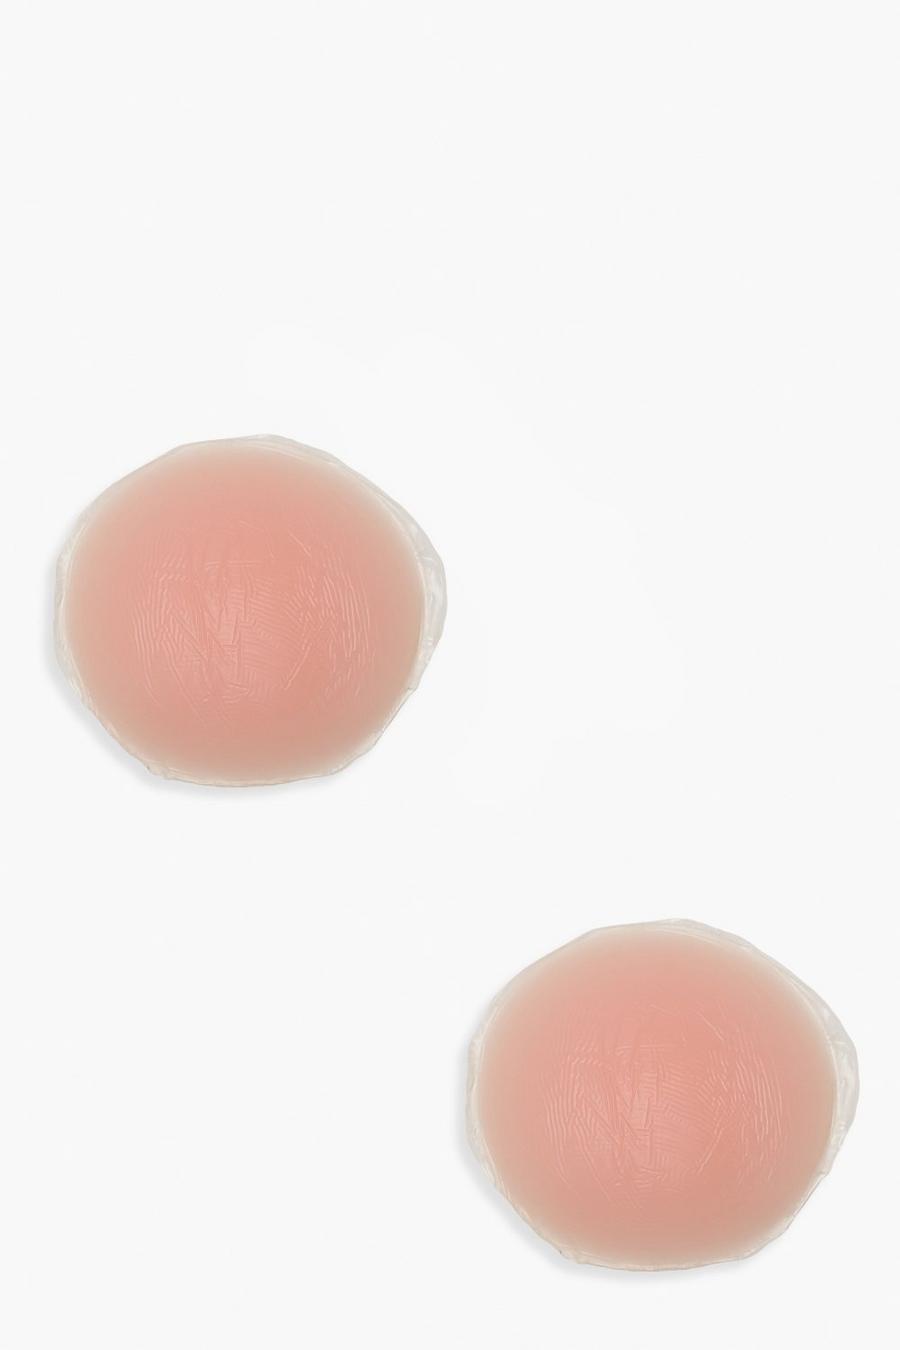 Nude Silicone Nipple Covers - Round